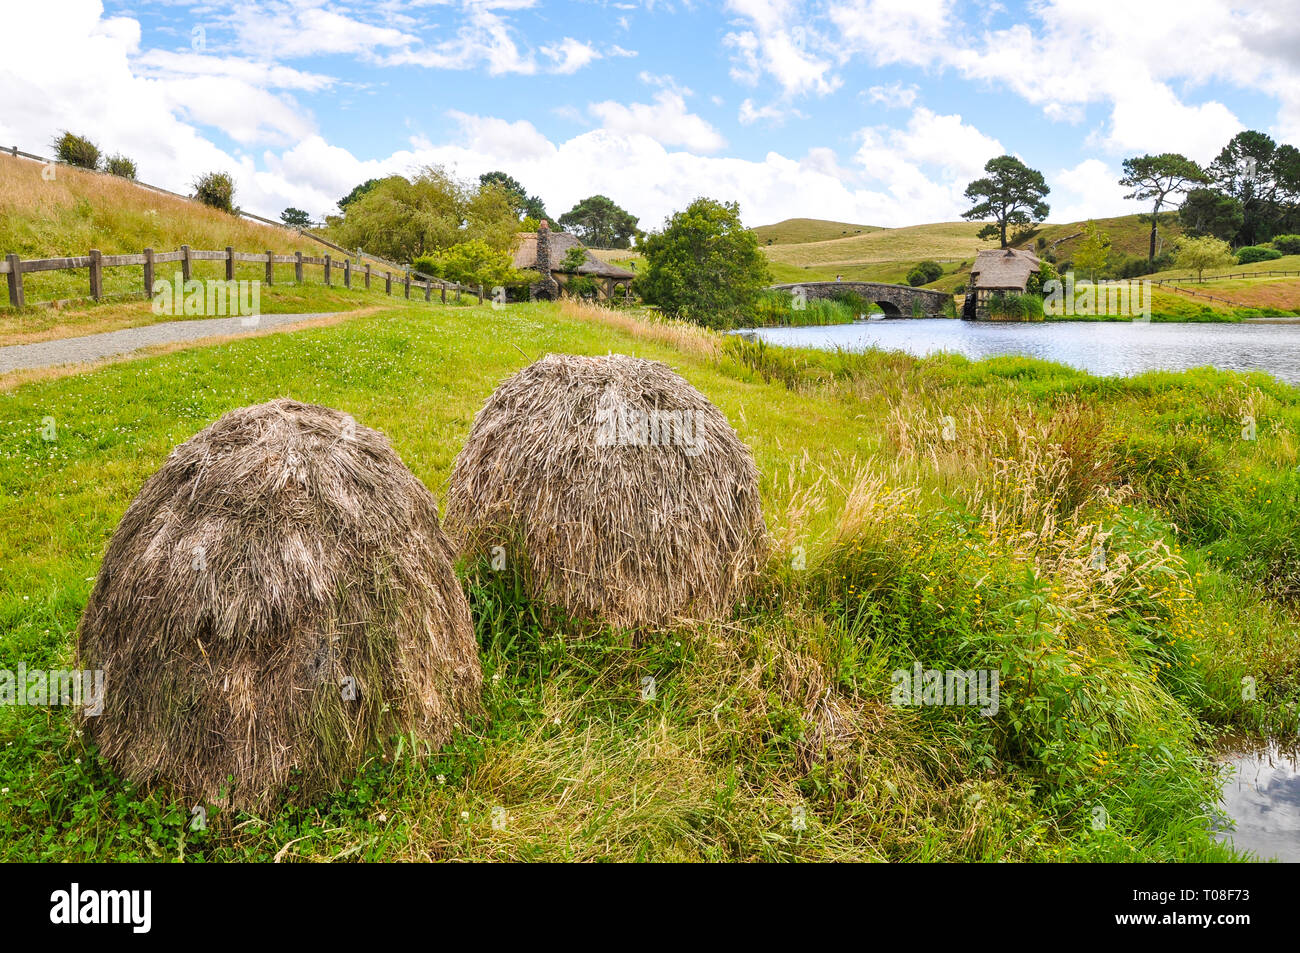 Hobbiton Movie Set - Location for the Lord of the Rings and The Hobbit films. Bag End lake, mill. Visitor attraction in Waikato region New Zealand Stock Photo